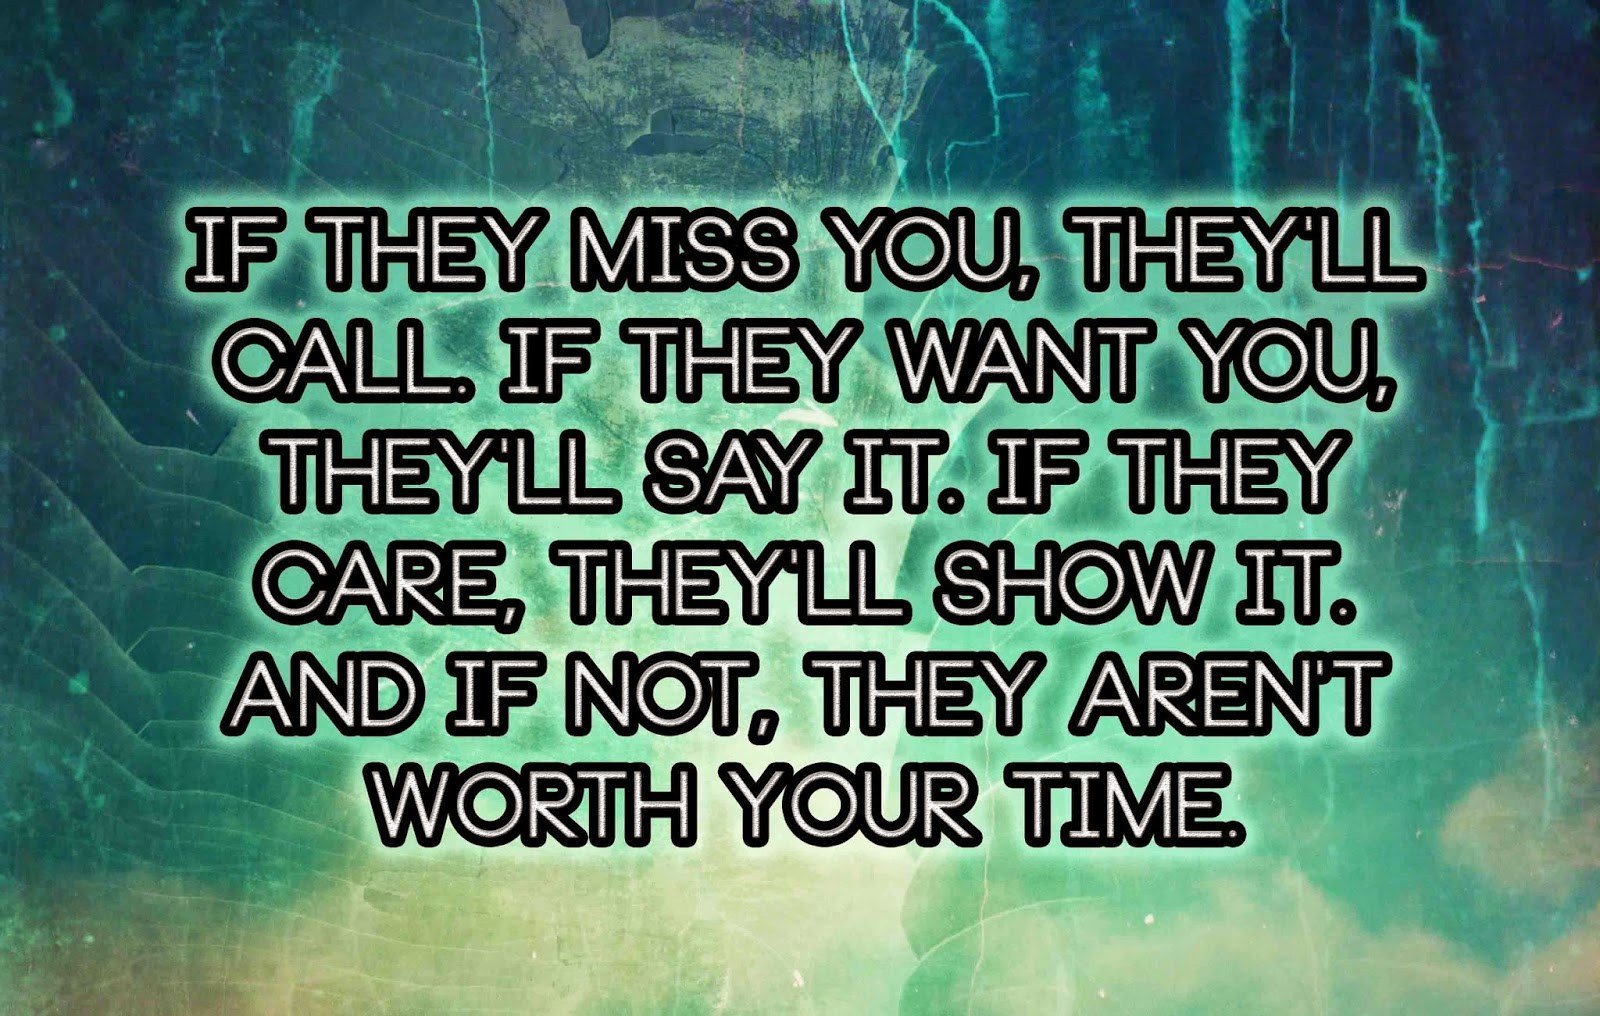 If They Miss you, They’ll Call. And If Not, They Aren’t Worth Your Time